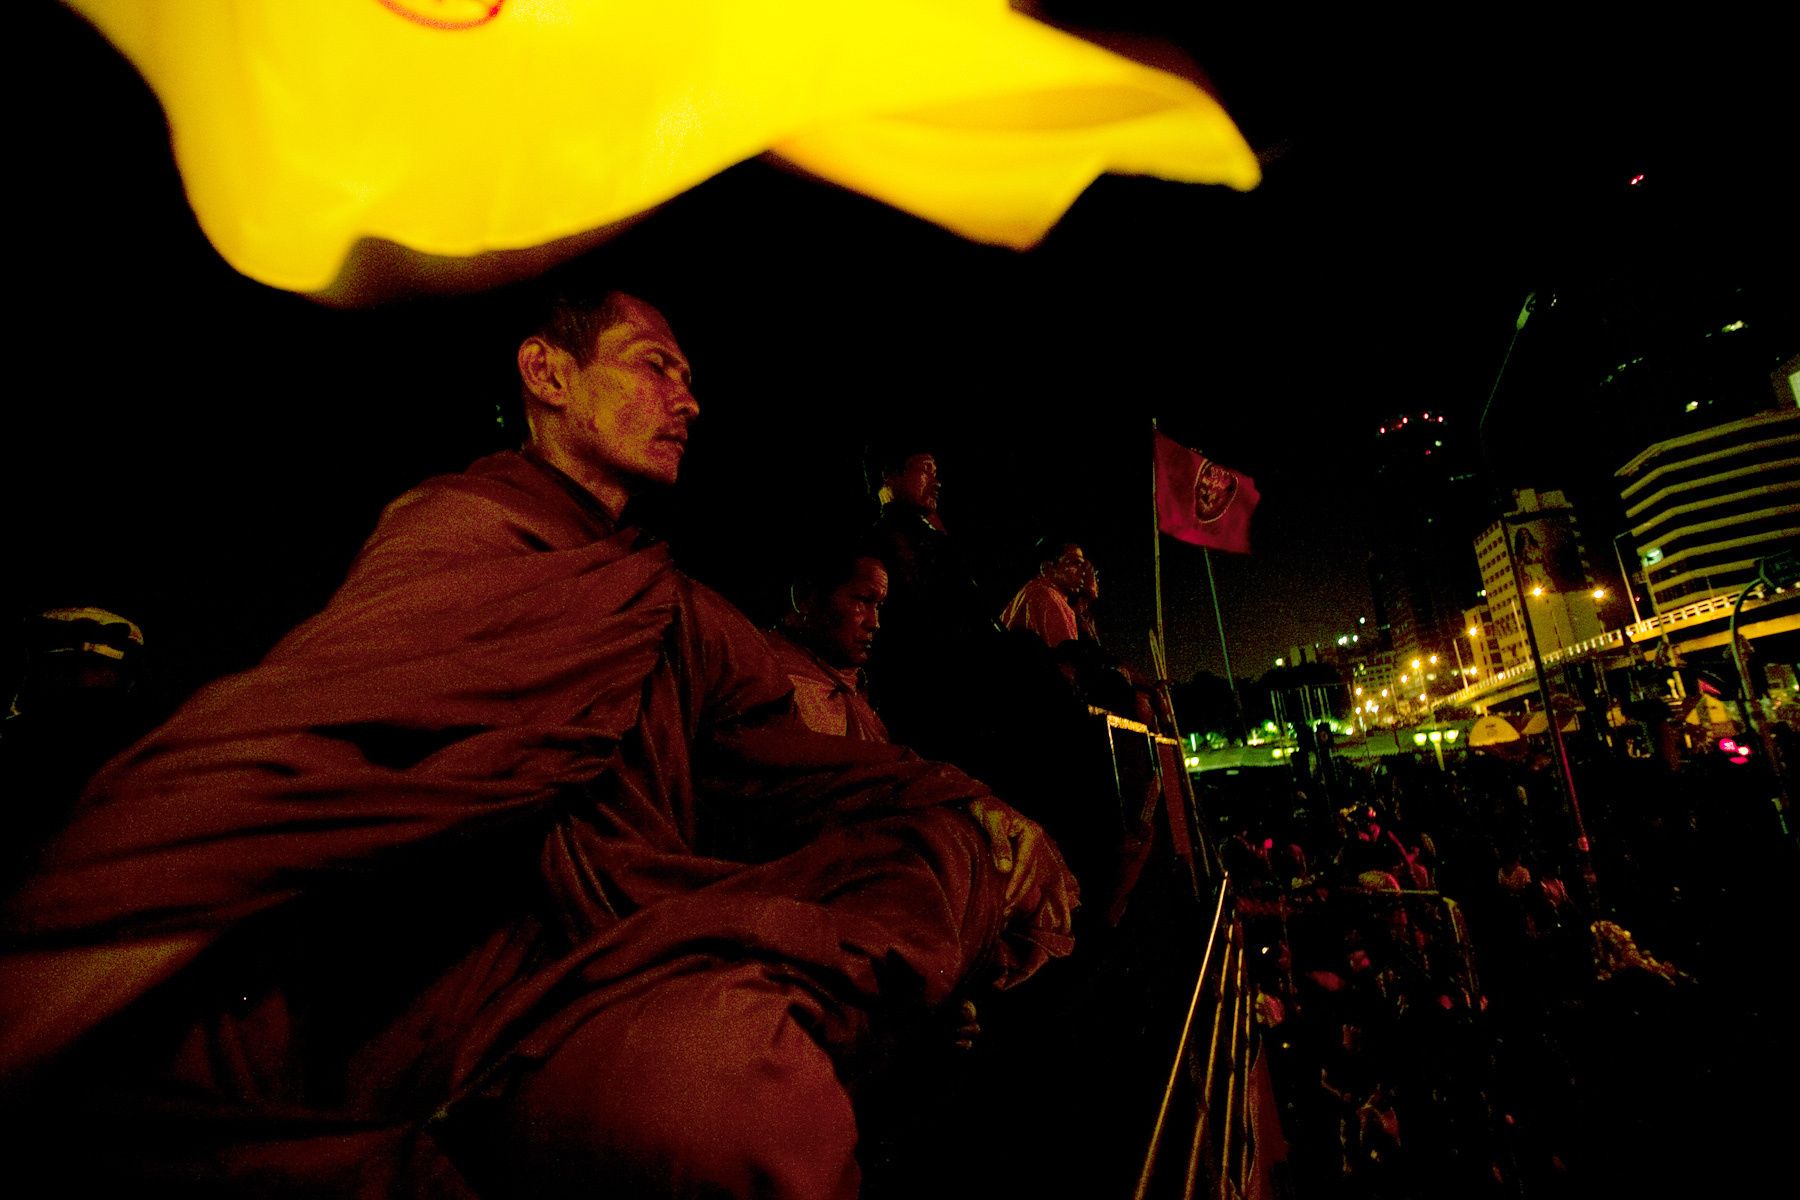 Monks who are members of The United Front for Democracy AgainstDictatorship (UDD) sit and wait for soldiers expected to try to remove their protest camp early that morning.